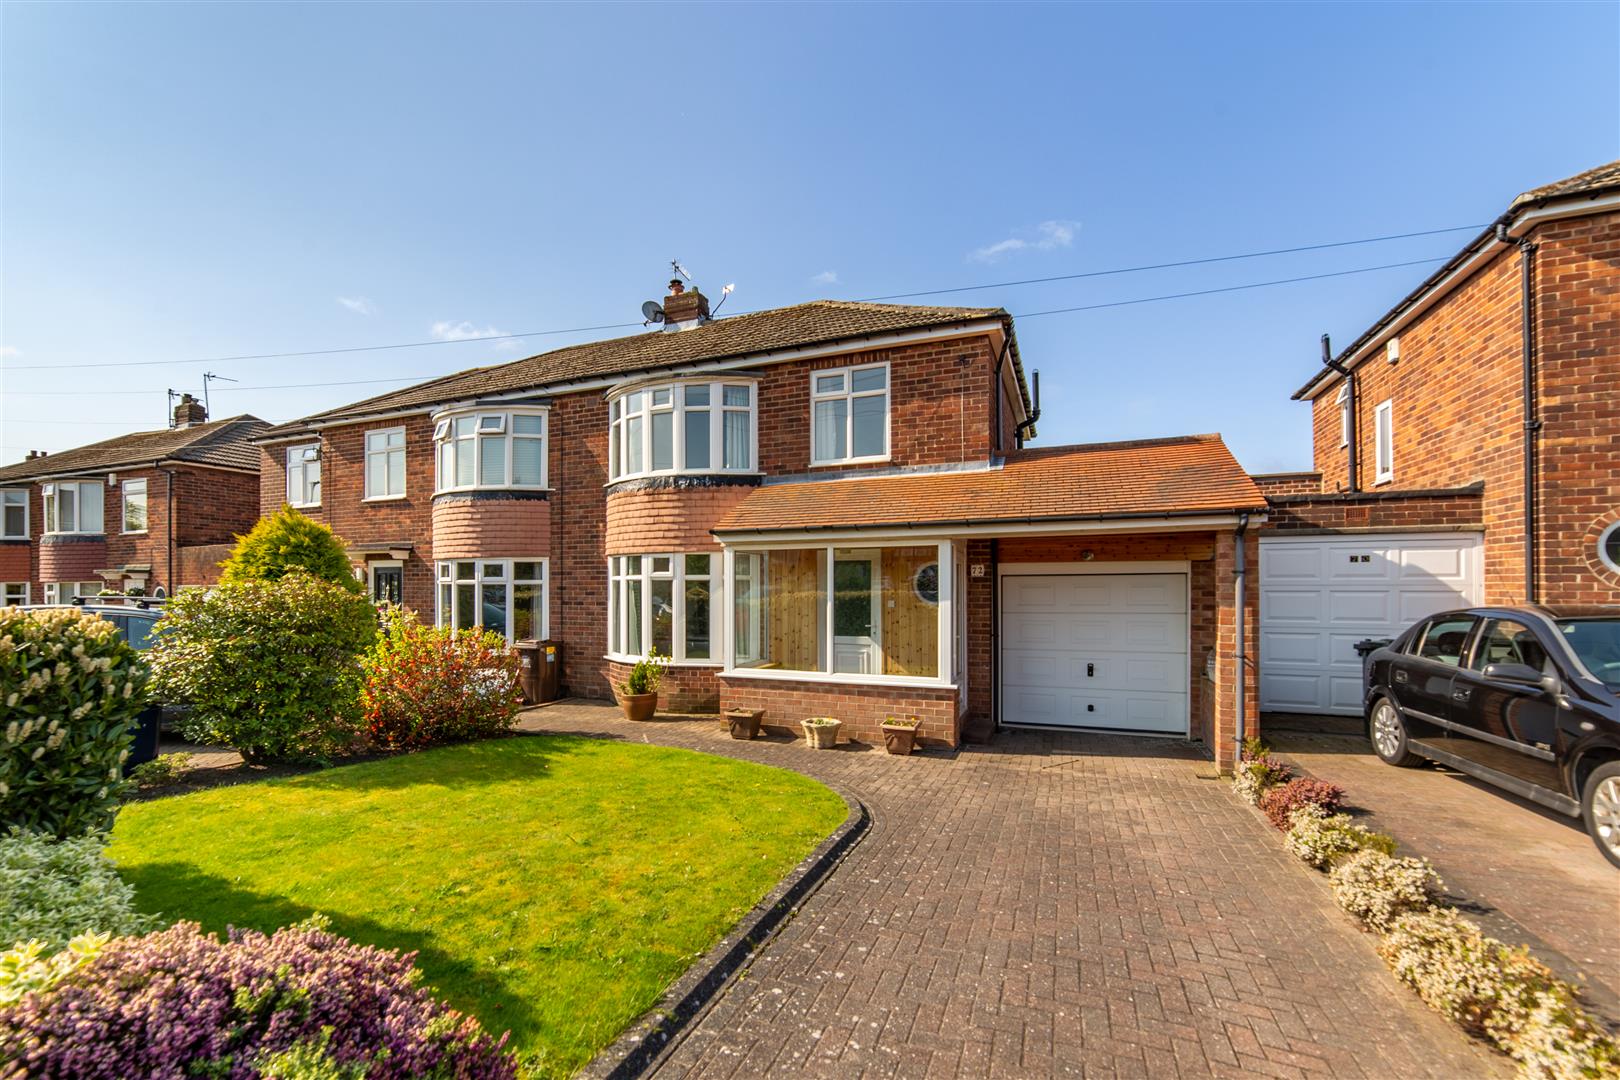 3 bed semi-detached house for sale in Greenfield Road, Newcastle Upon Tyne - Property Image 1